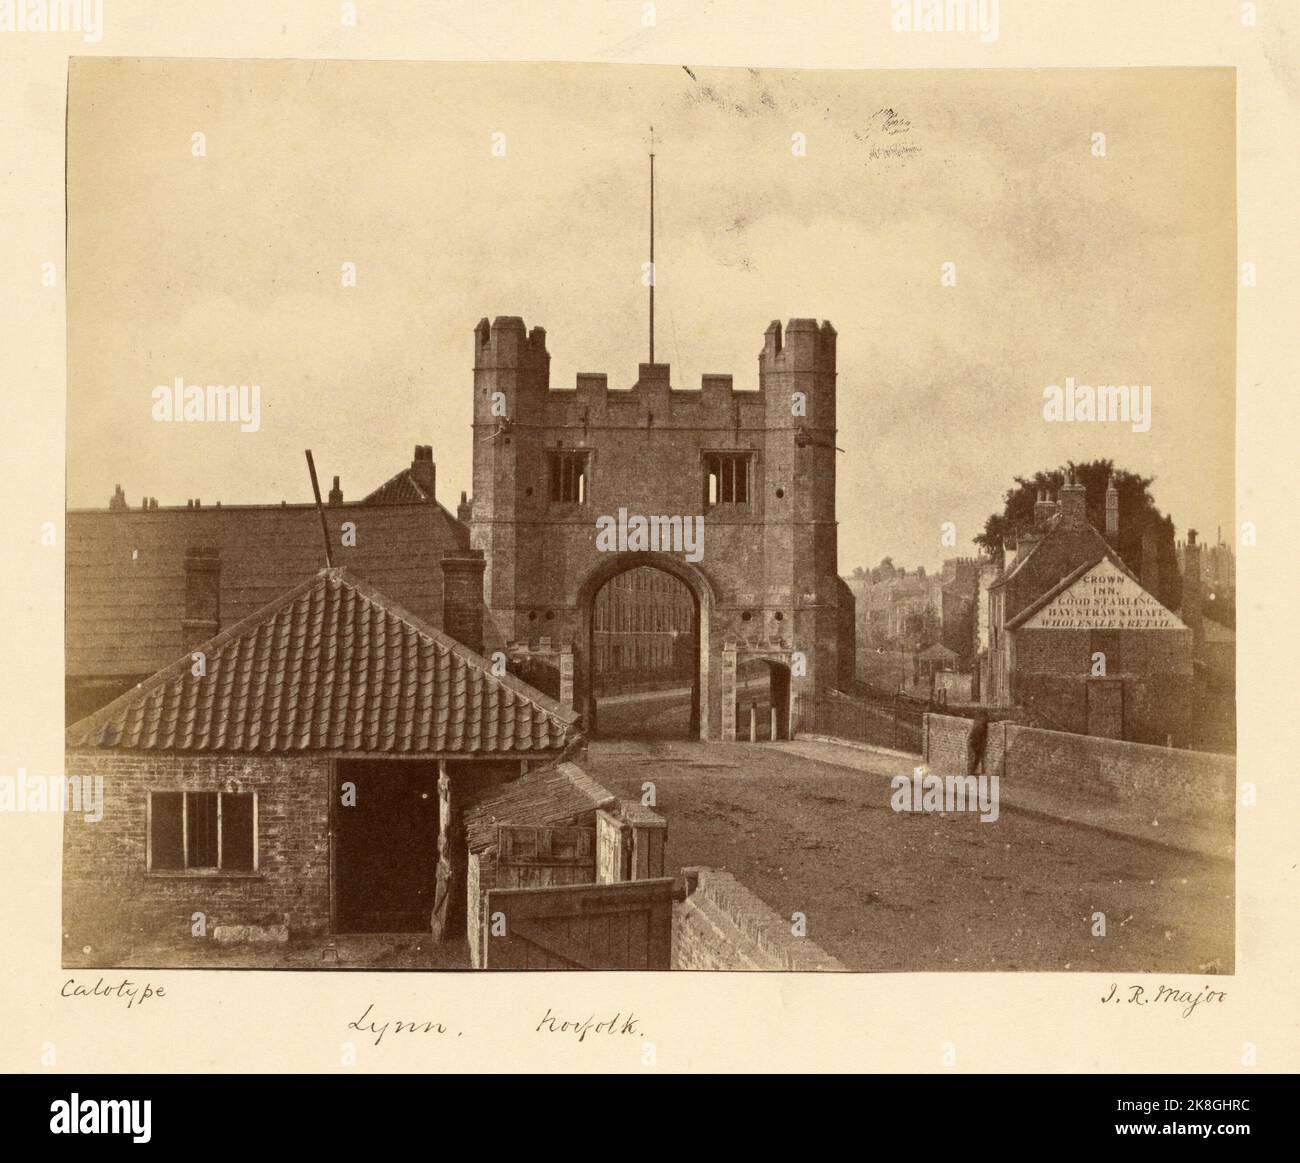 Lynn, Norfolk.  Reverend John Richardson Major.  1854–1856.  An albumen silver photographic print of the area around the medieval South Gates at the southern entrance to the town of King's Lynn in Norfolk. Stock Photo